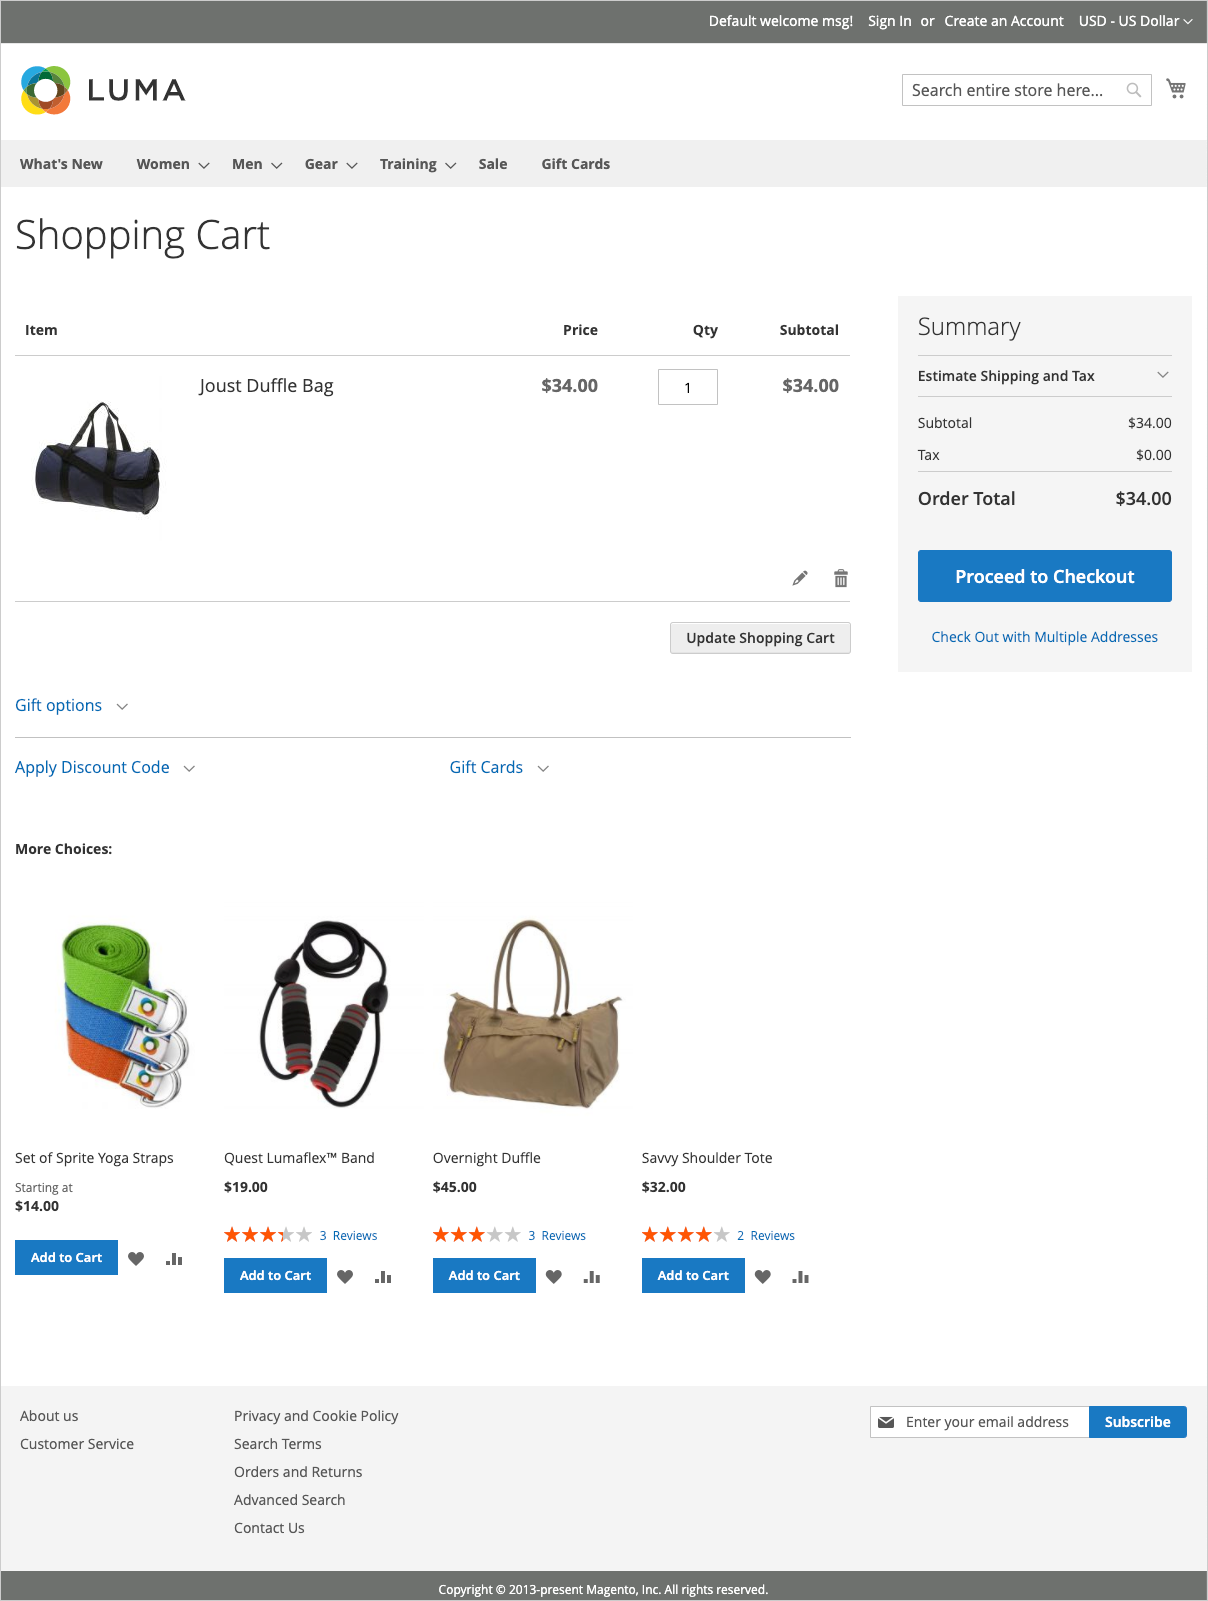 The shopping cart page displays tools the shopper can use to manage the products for their order 